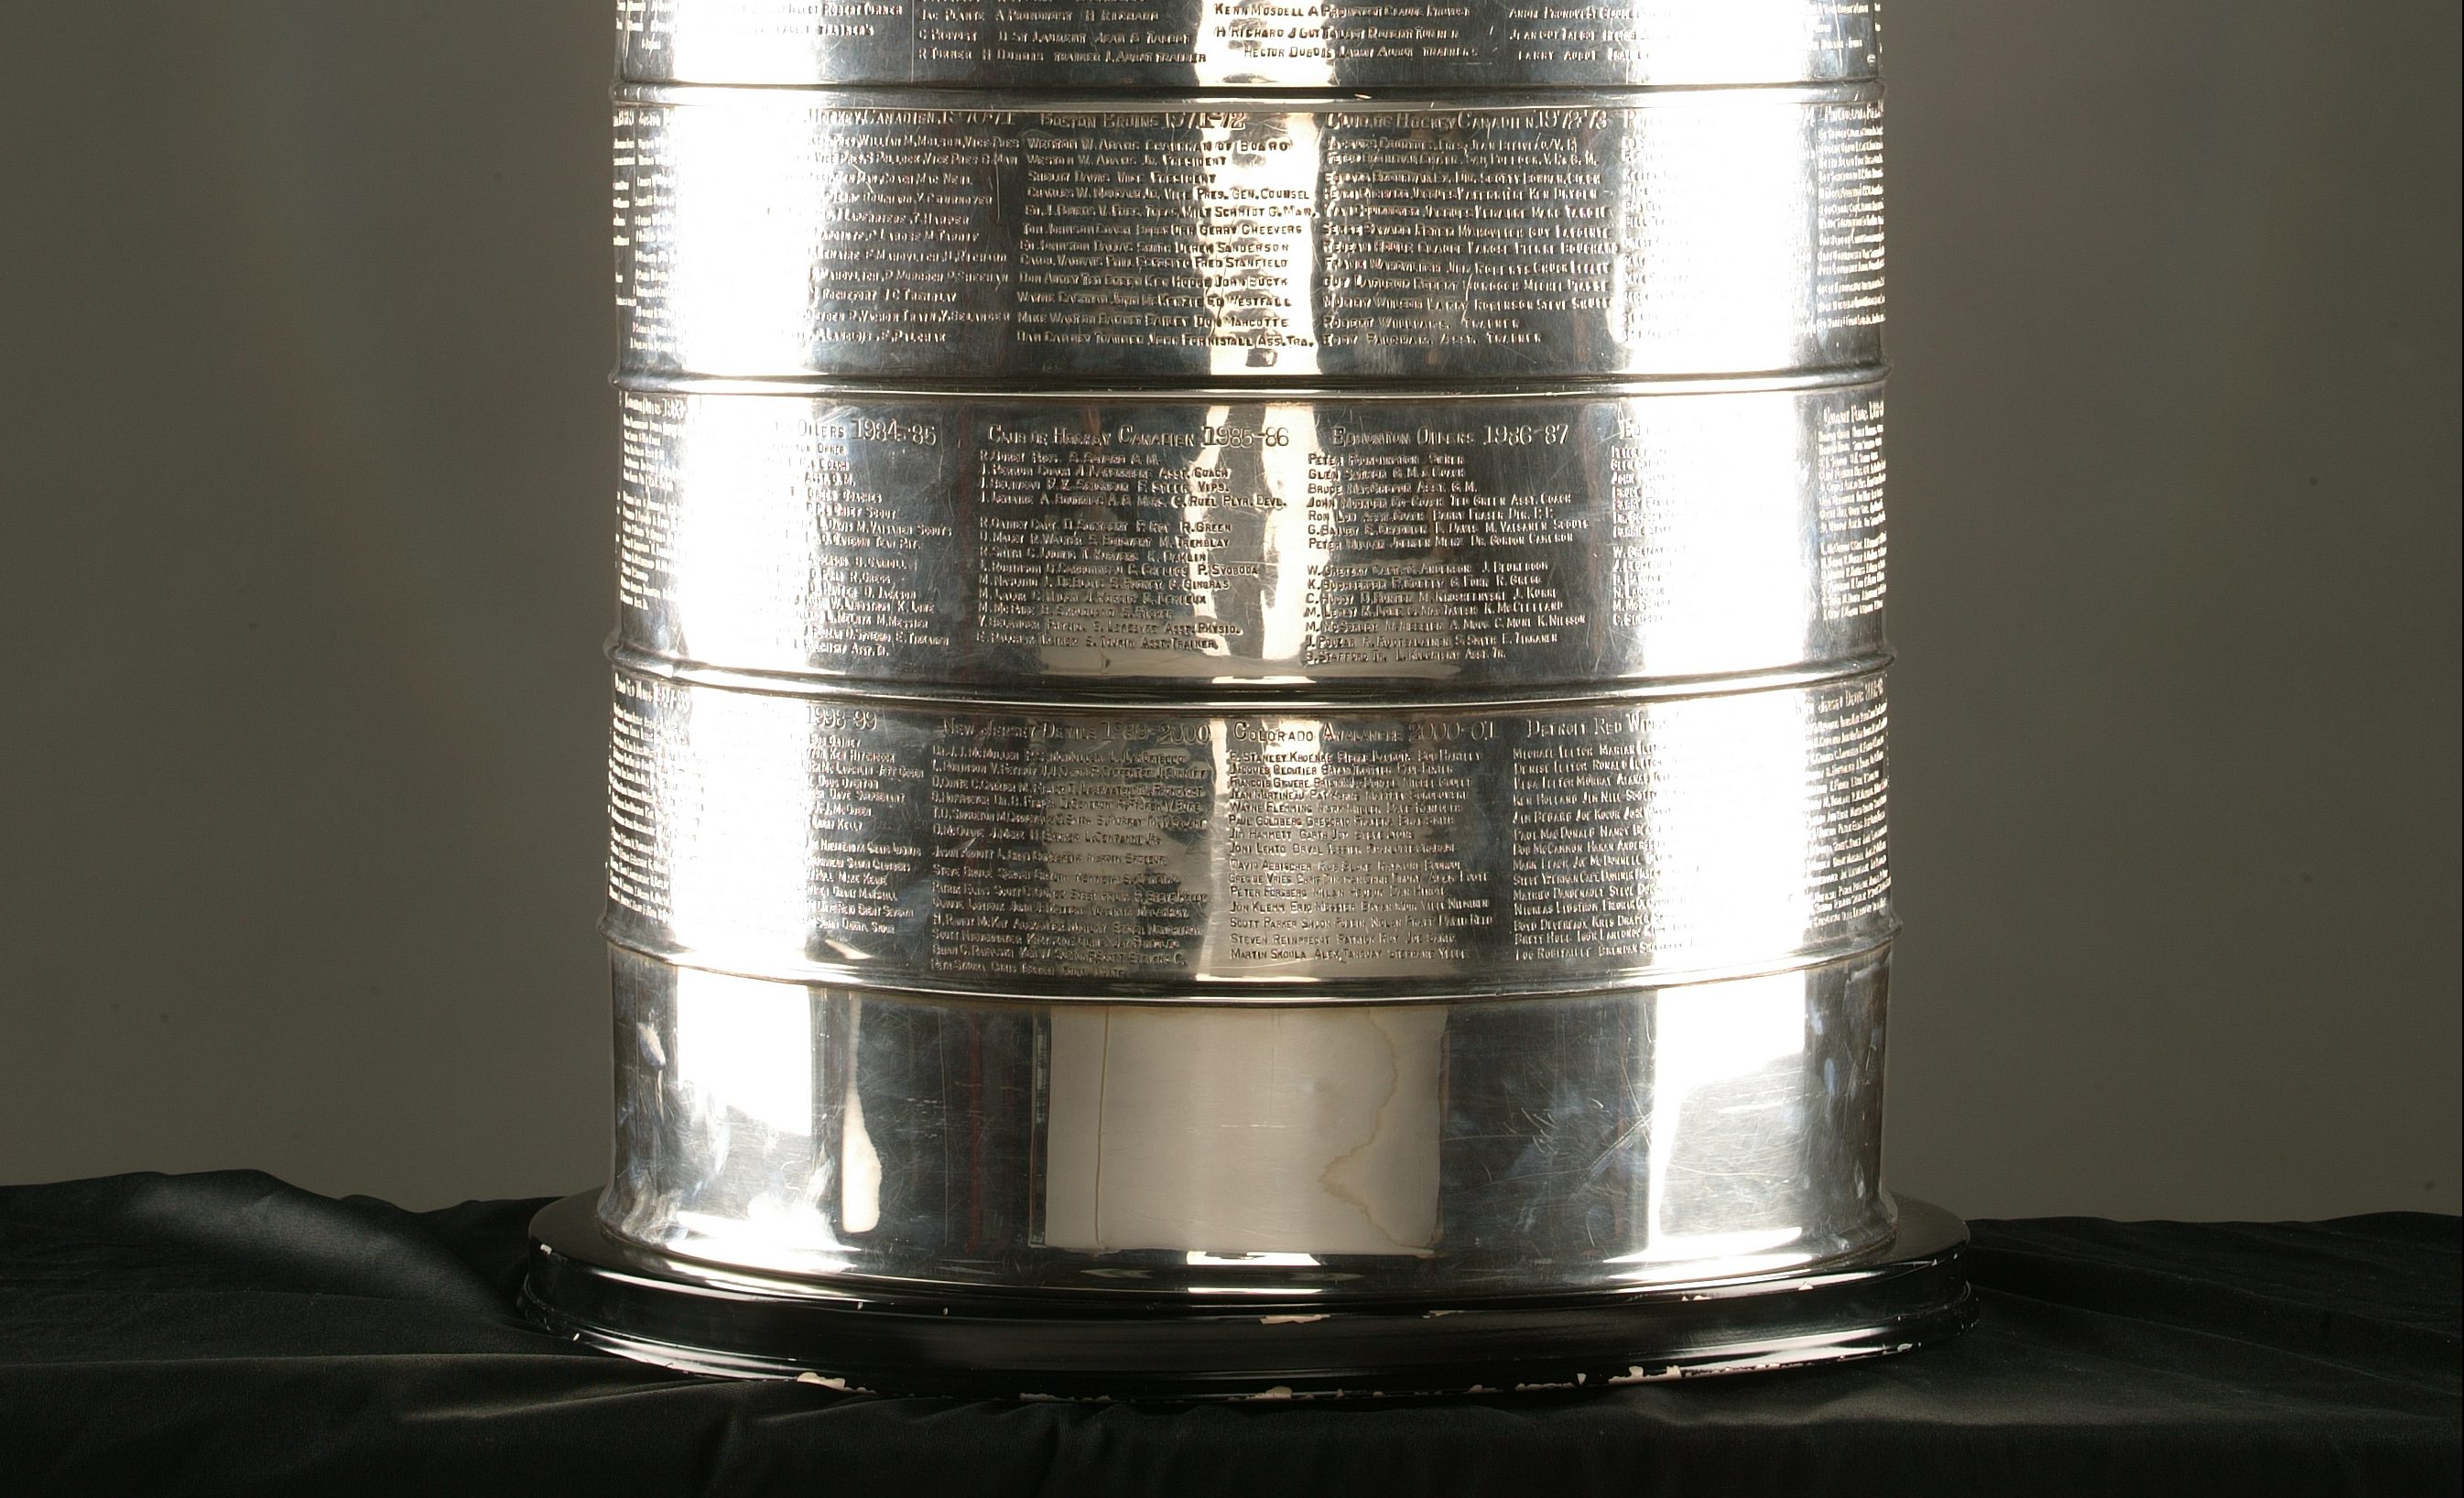 22 Things You Might Not Know About the Stanley Cup